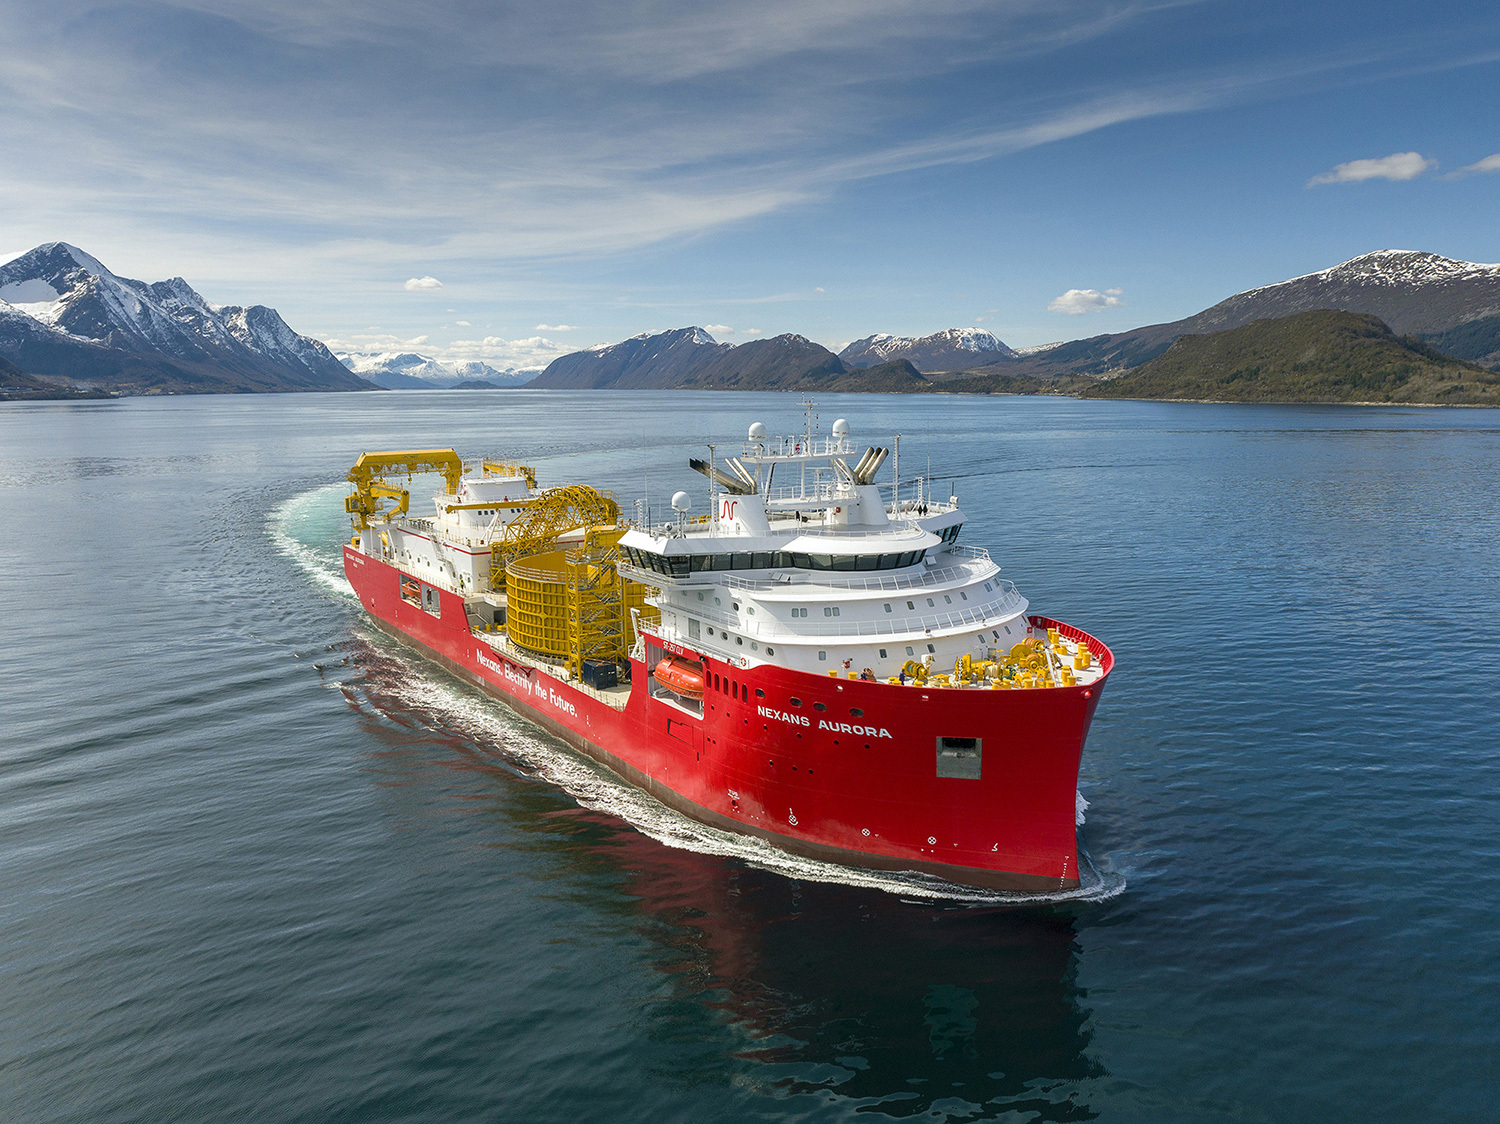 'Nexans Aurora' is a state-of-the-art cable-laying vessel for electrification of the future and is equipped with state-of-the-art equipment for transport and laying of cable and umbilical, including bundling, cable protection and splicing. Photo: Per Eide Studio.